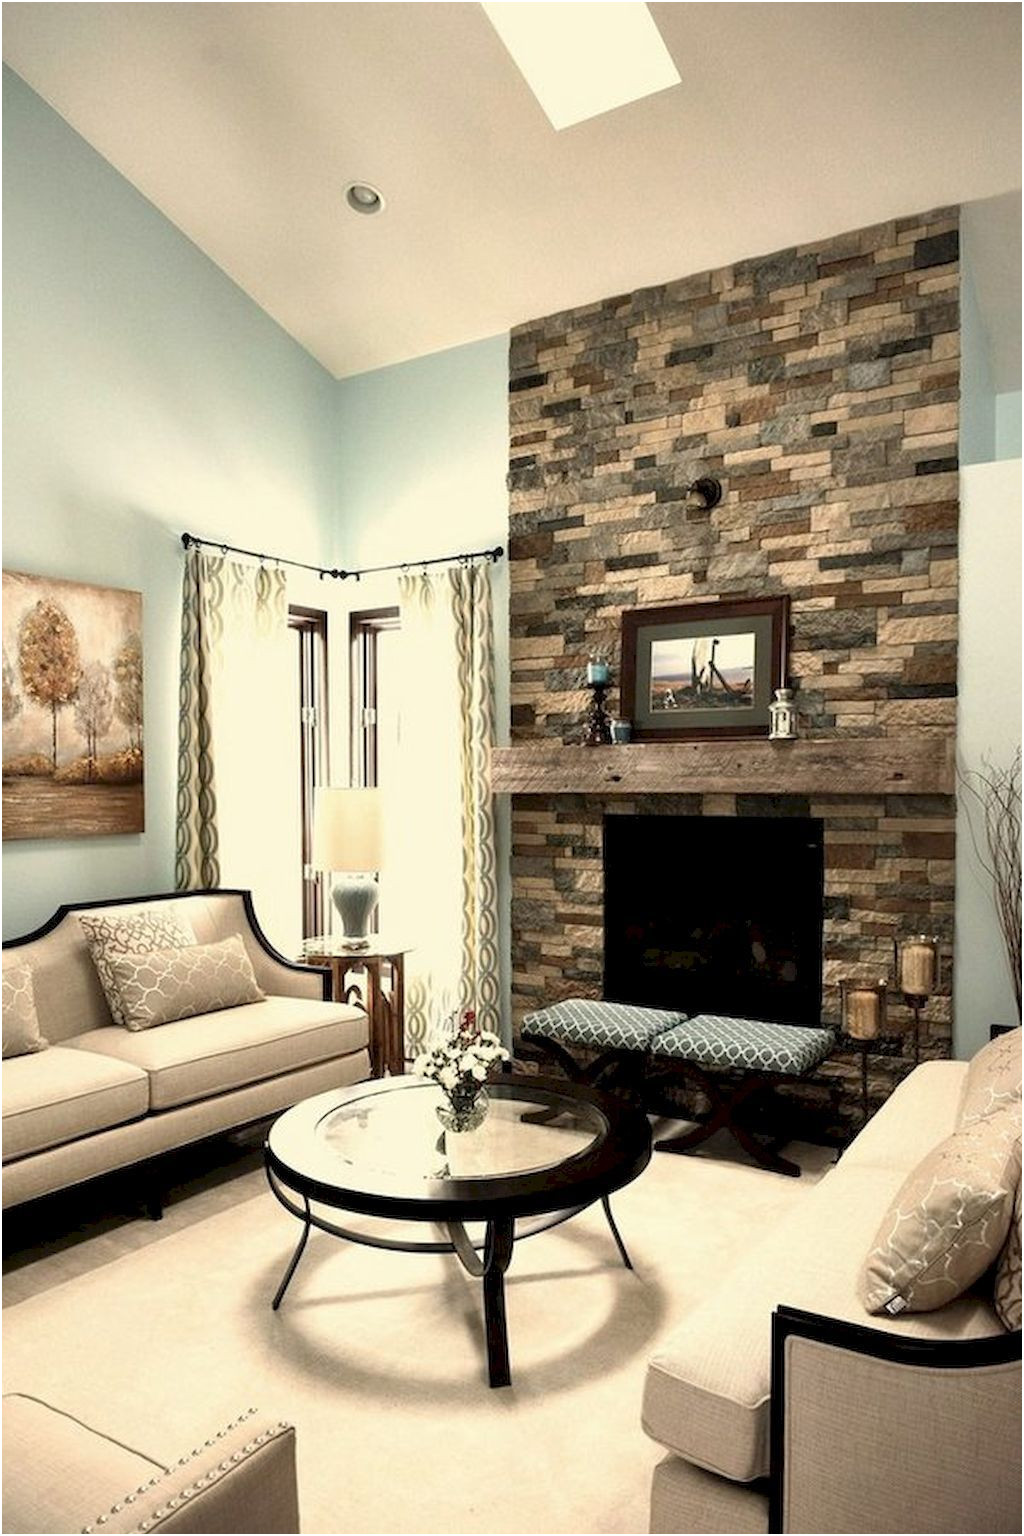 Best Of Living Room Idea with Fireplace